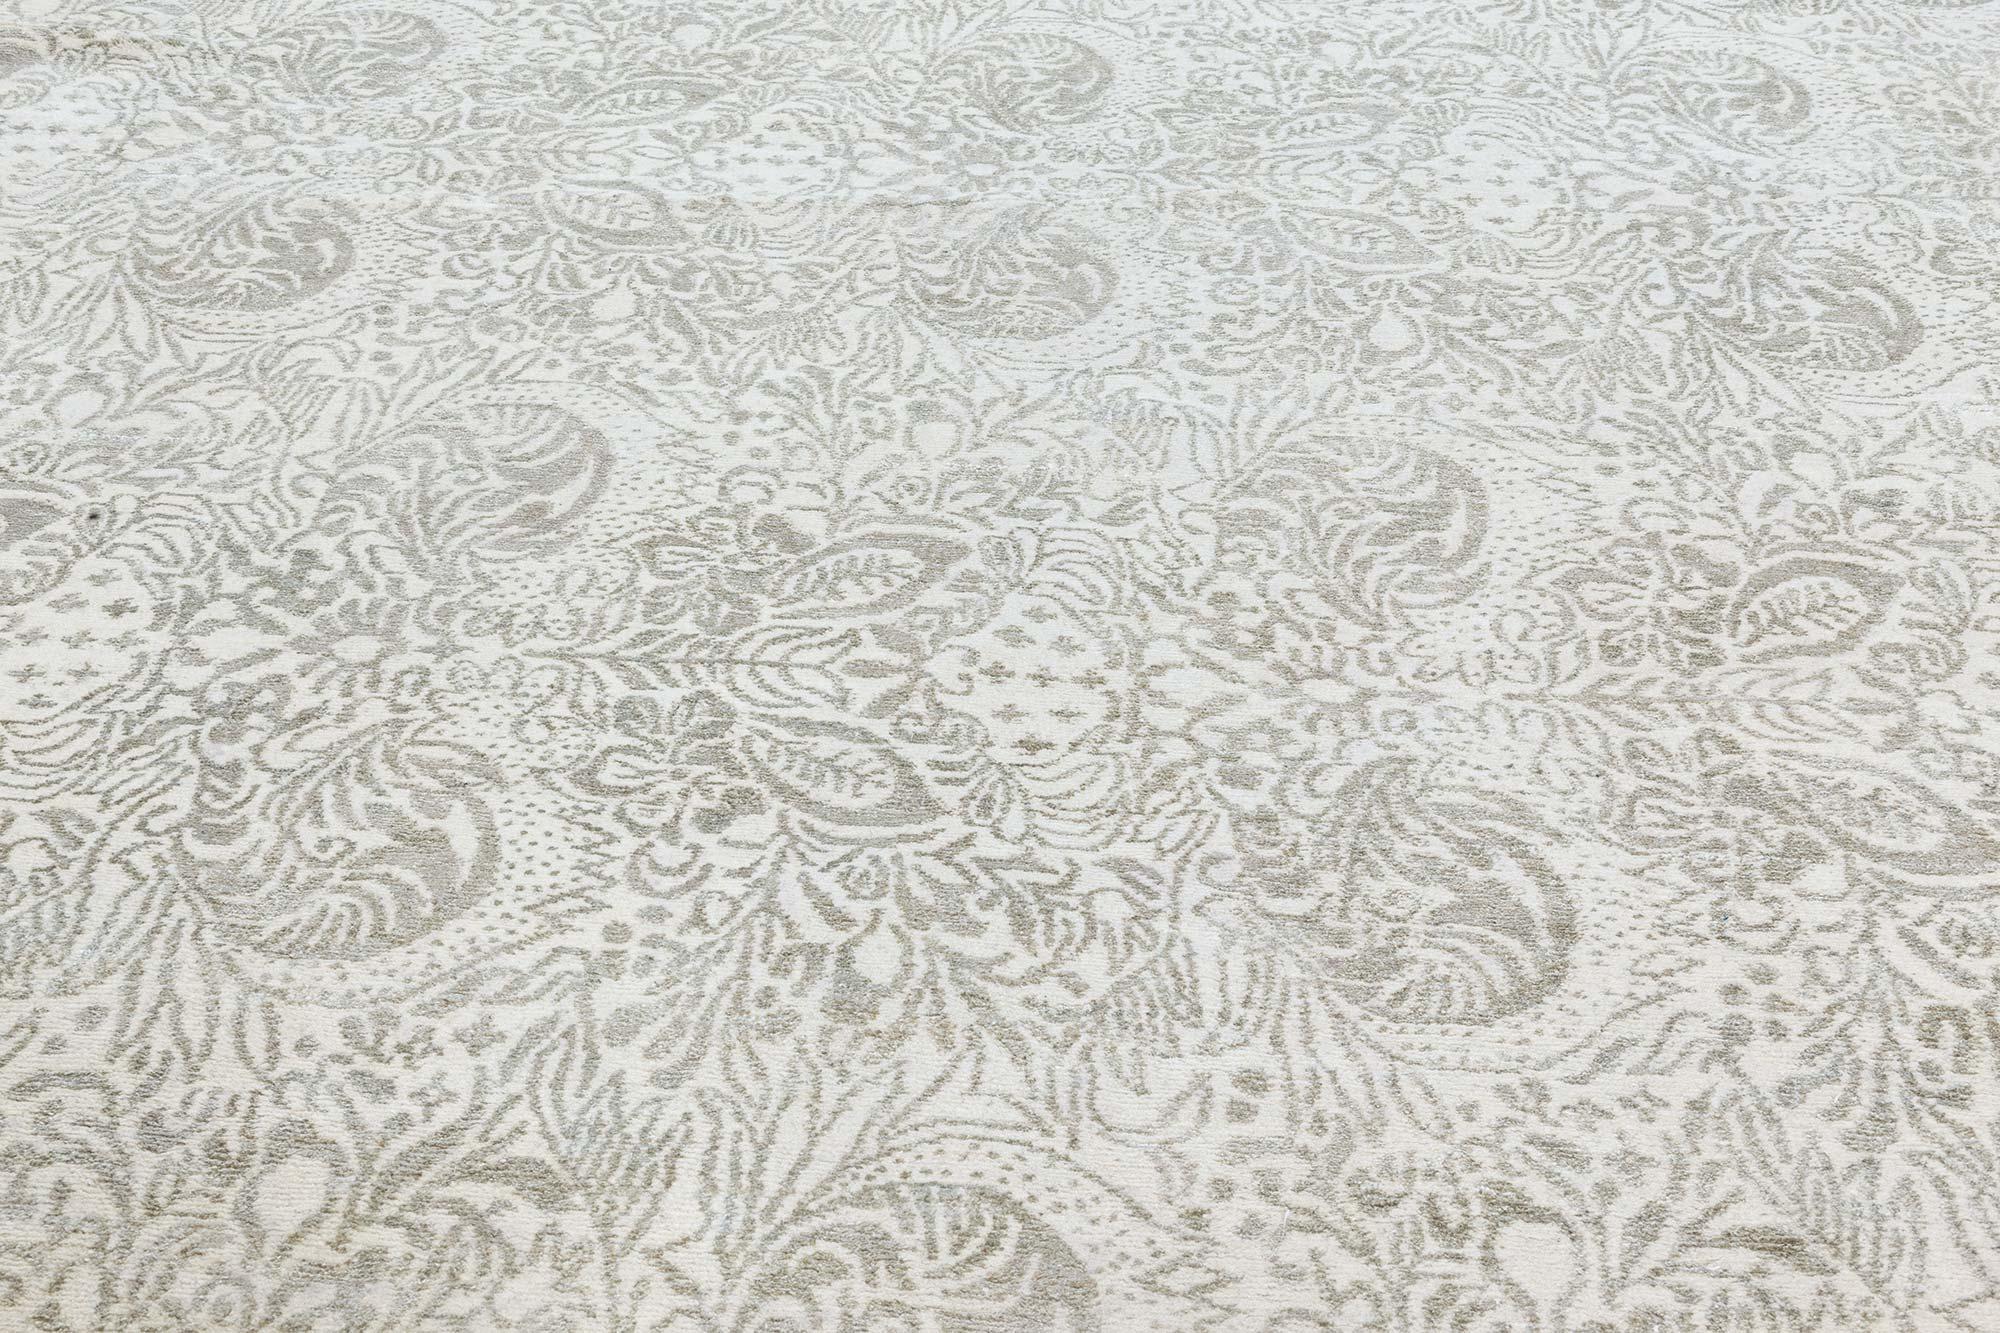 Contemporary Traditional Inspired Floral Rug by Doris Leslie Blau In New Condition For Sale In New York, NY